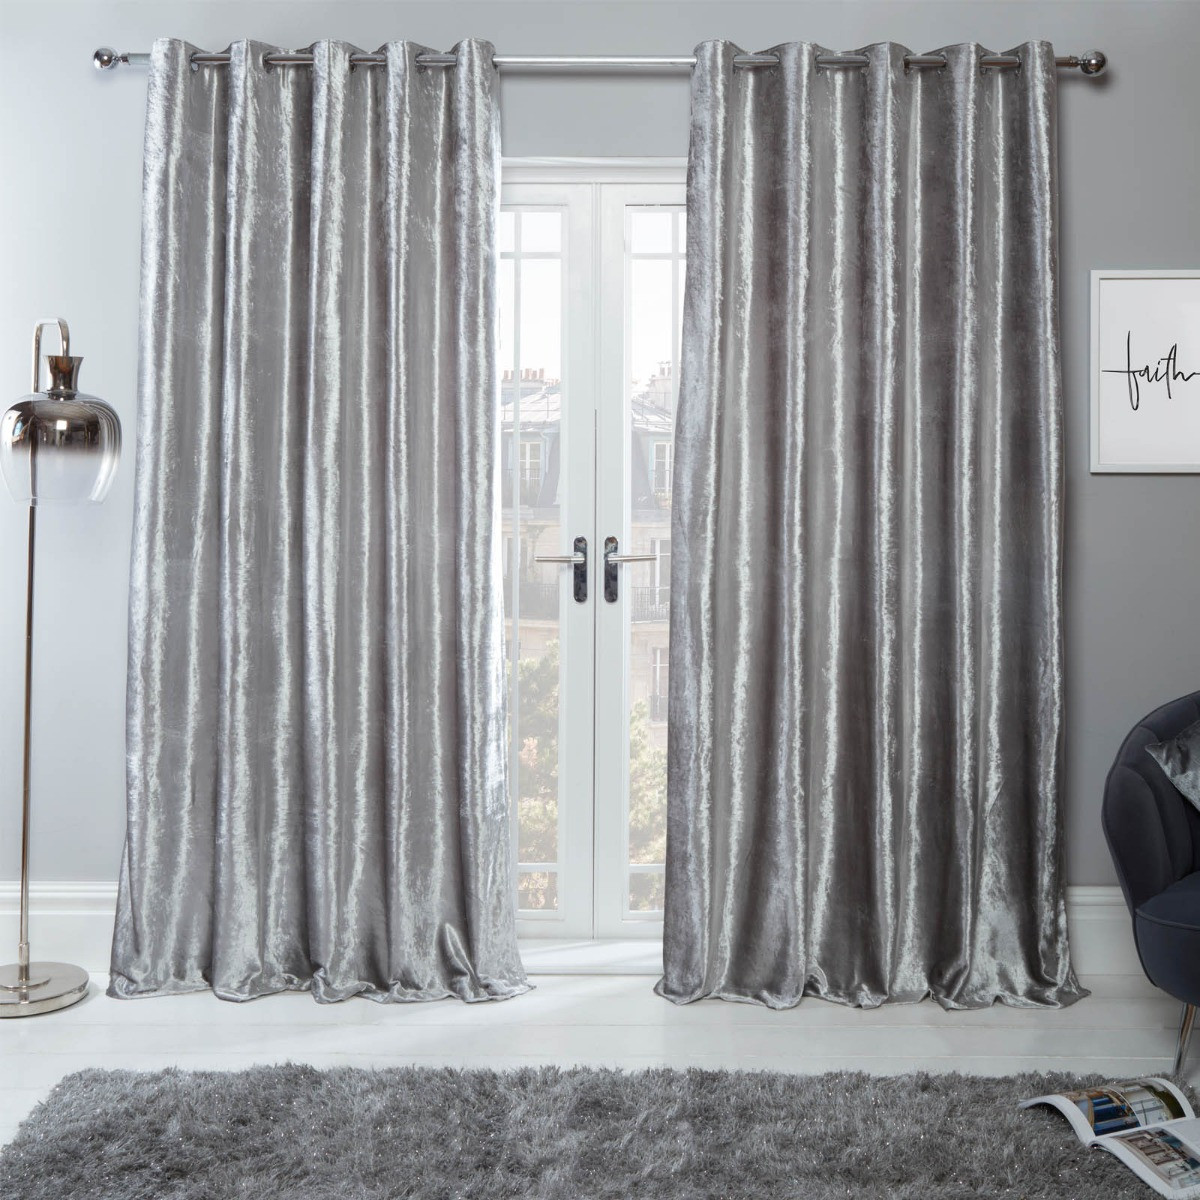 Sienna Home Crushed Velvet Eyelet Curtains - Silver 90" x 54">